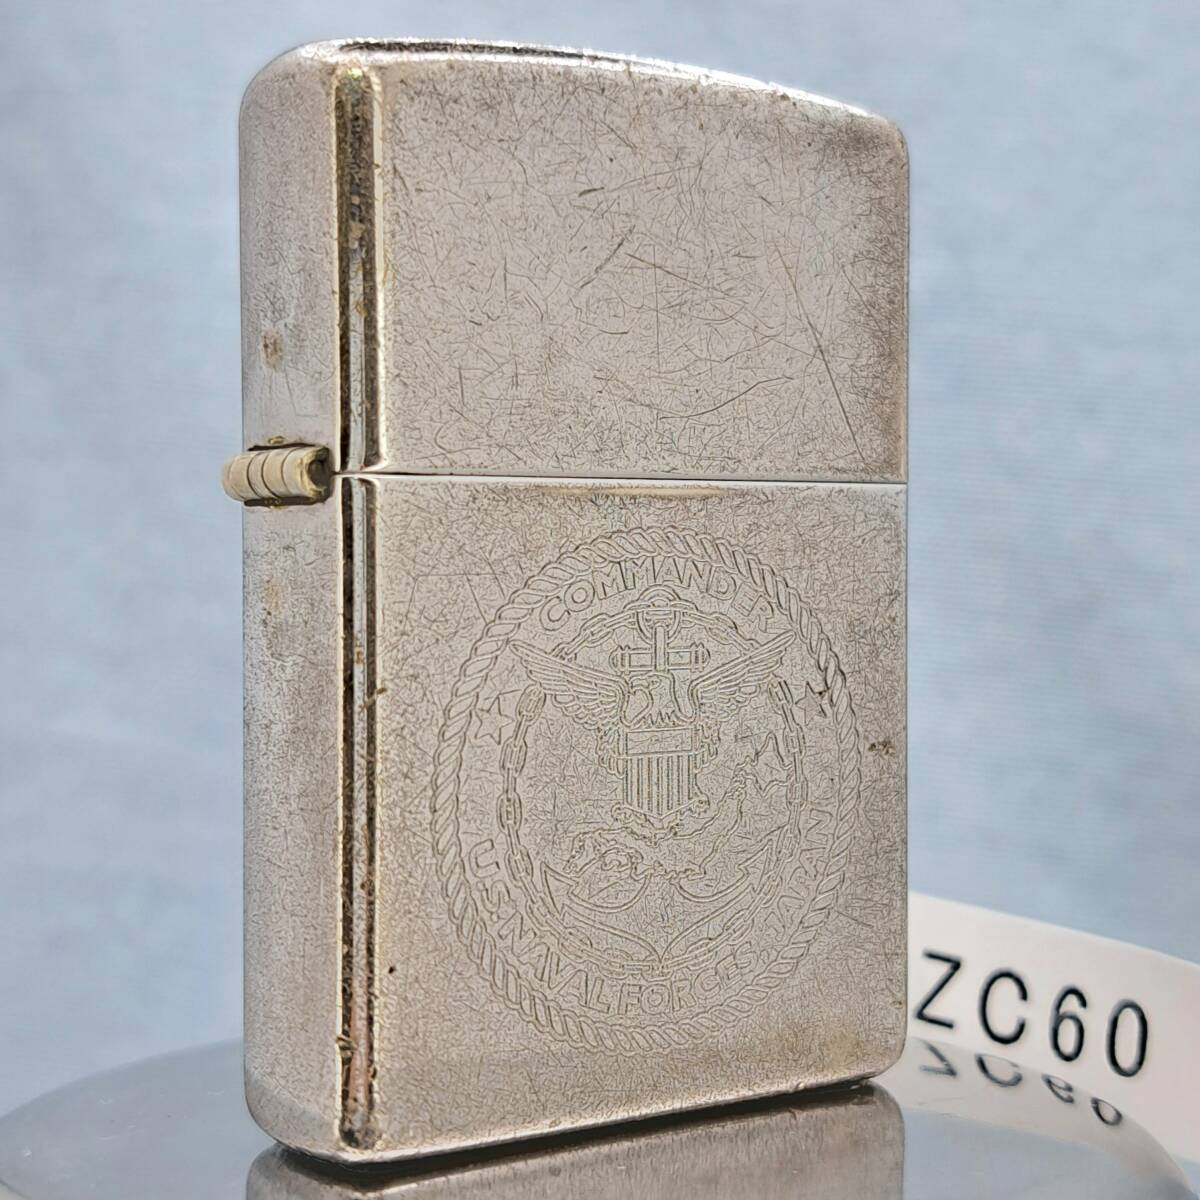 1 jpy ~ zippo beautiful goods rare US NAVAL FORCES JAPAN. day the US armed forces silver SILVER color Zippo - oil lighter USA ZC60